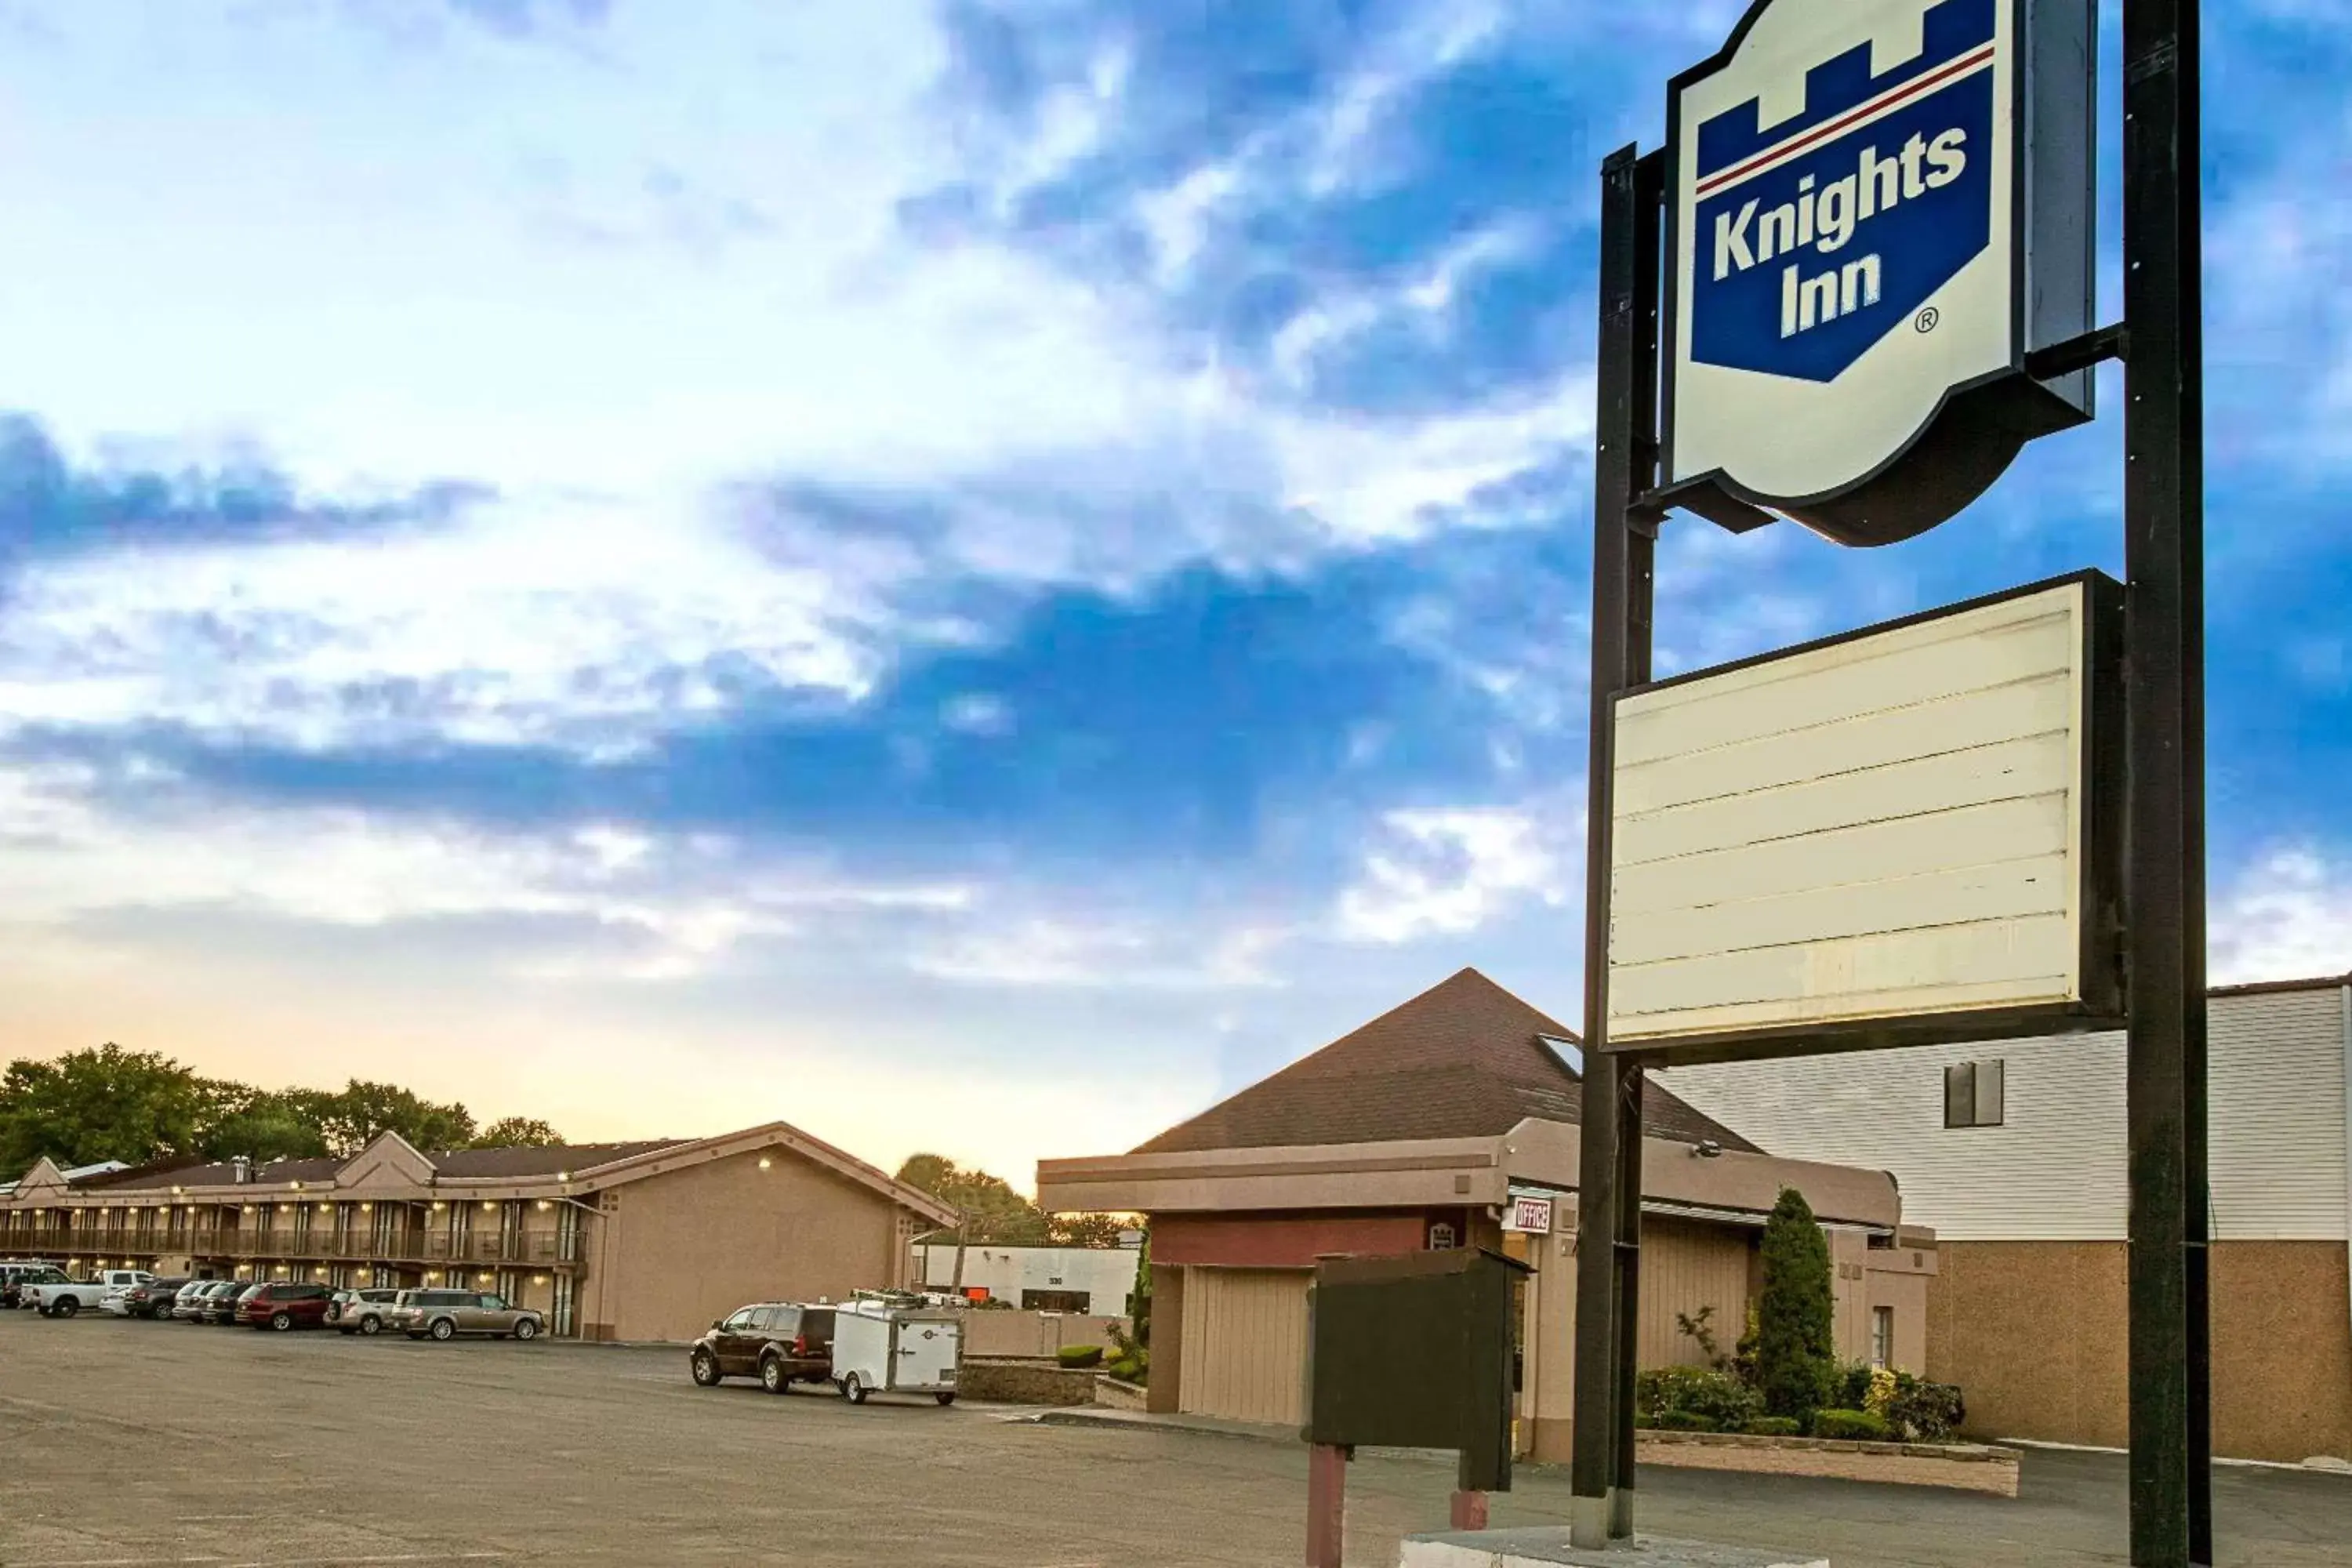 Property Building in Knights Inn South Hackensack Motel